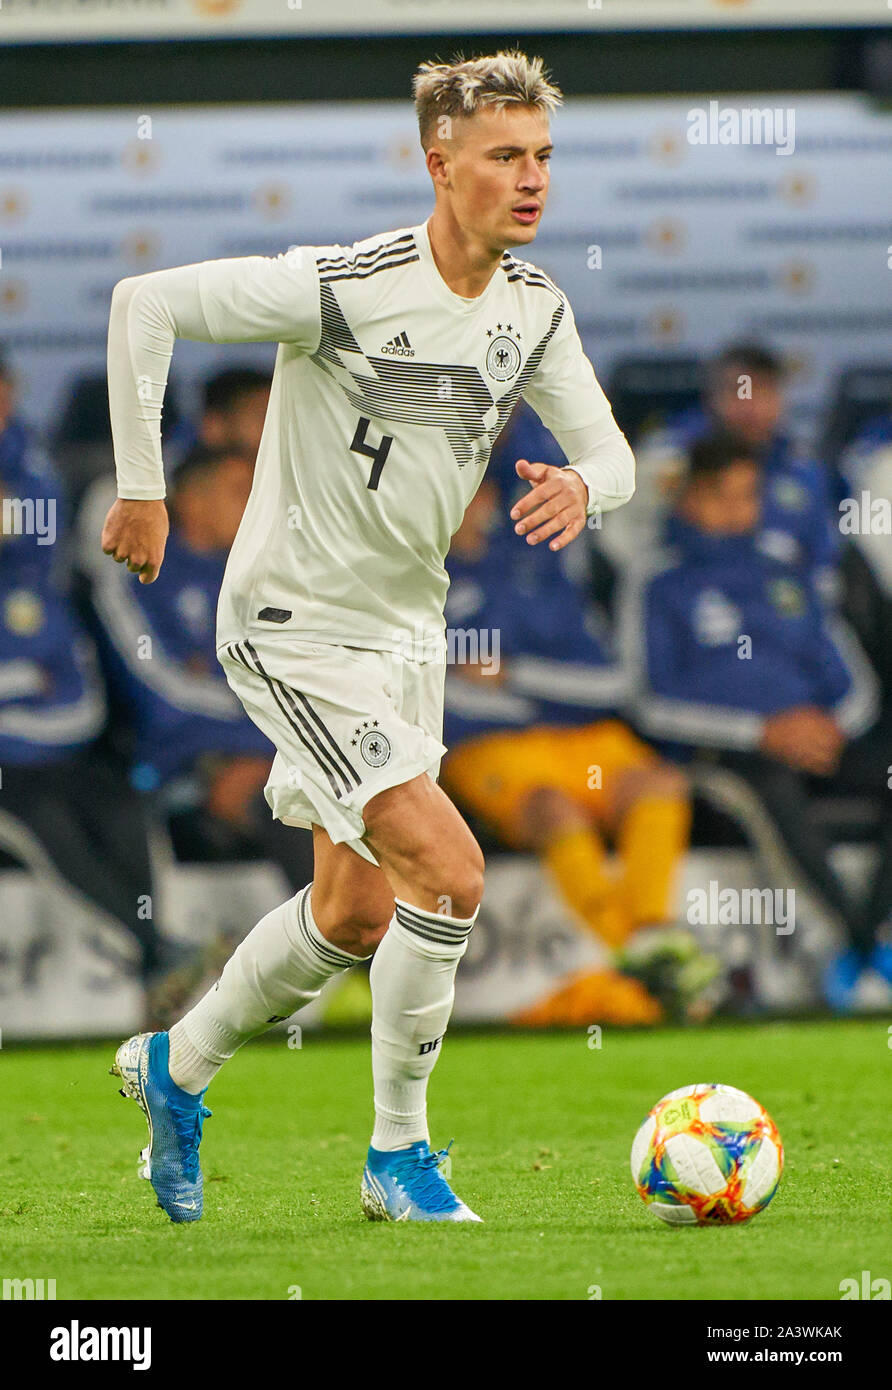 Germany- Argentina, Soccer, Dortmund, October 09, 2019 Robin KOCH, DFB 4  drives, controls the ball, action, full-size, Single action, einzelaktion,  with ball, full body, whole figure, cutout, single shots, ball treatment,  pick-up,